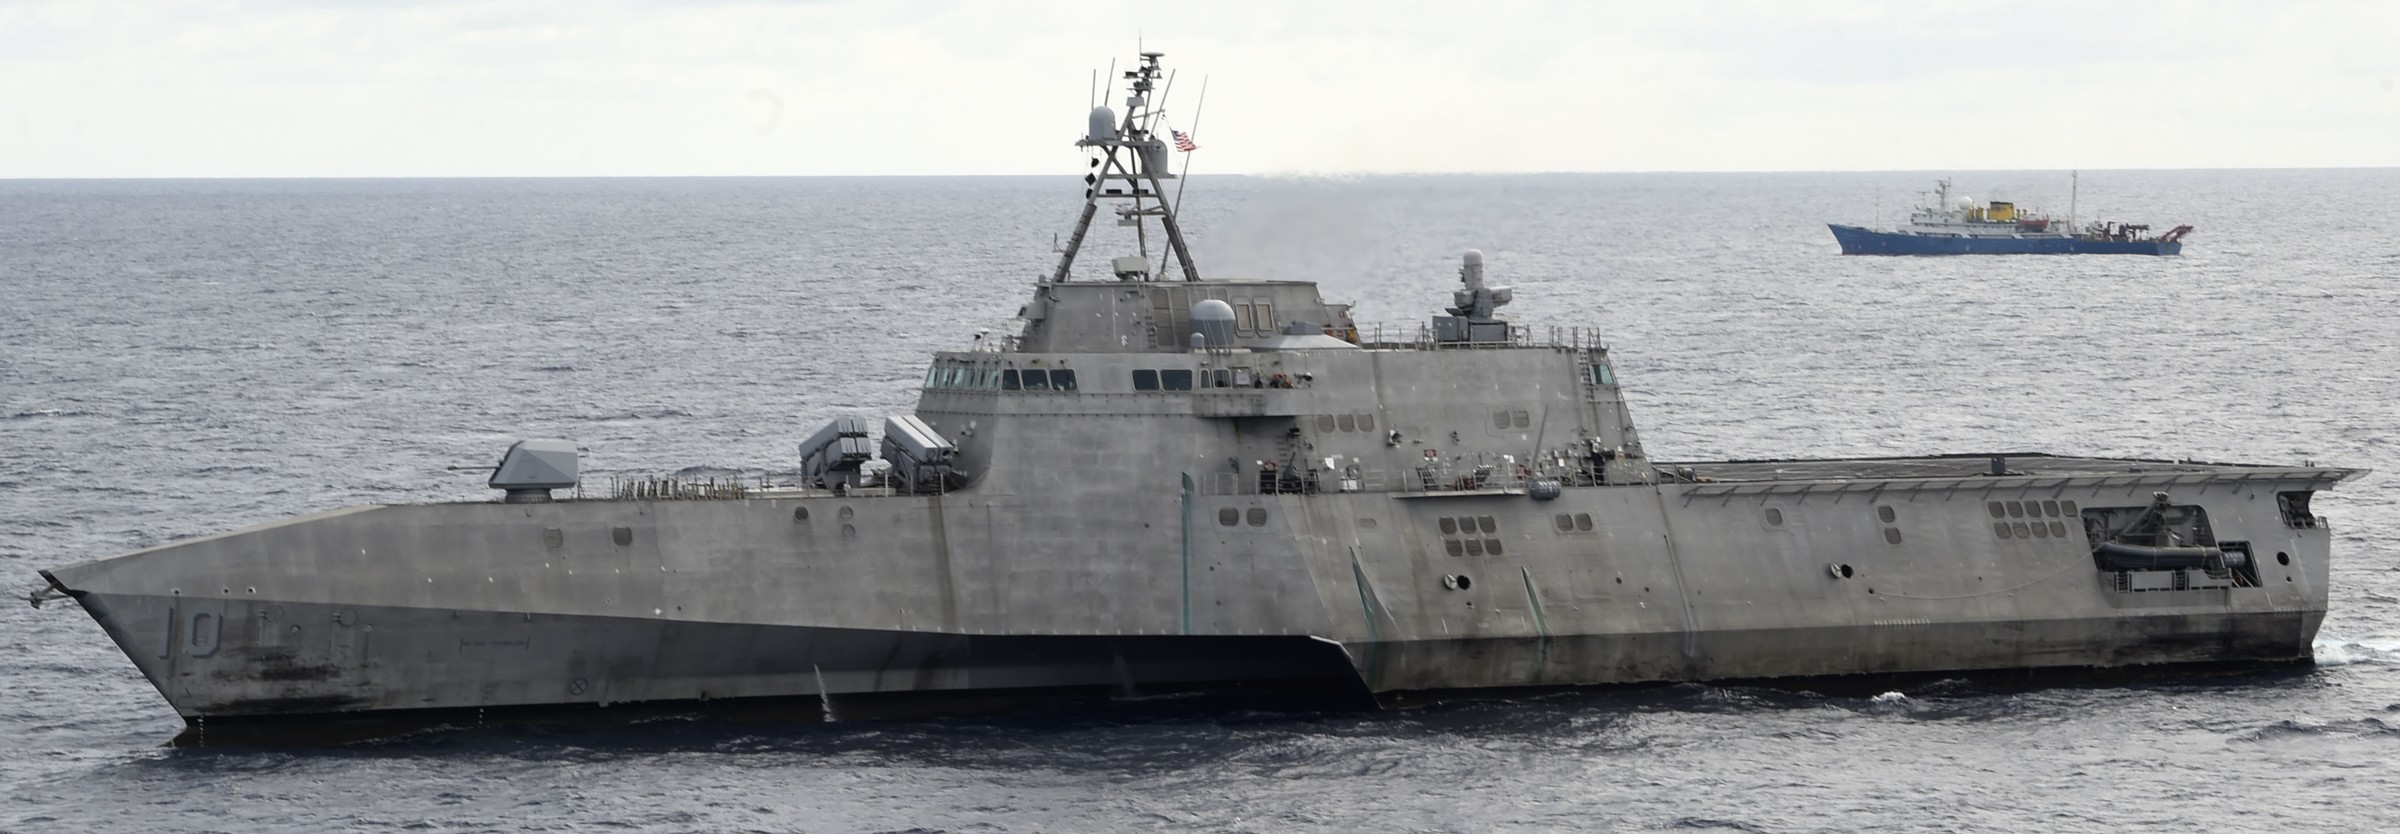 lcs-10 uss gabrielle giffords littoral combat ship independence class us navy 66